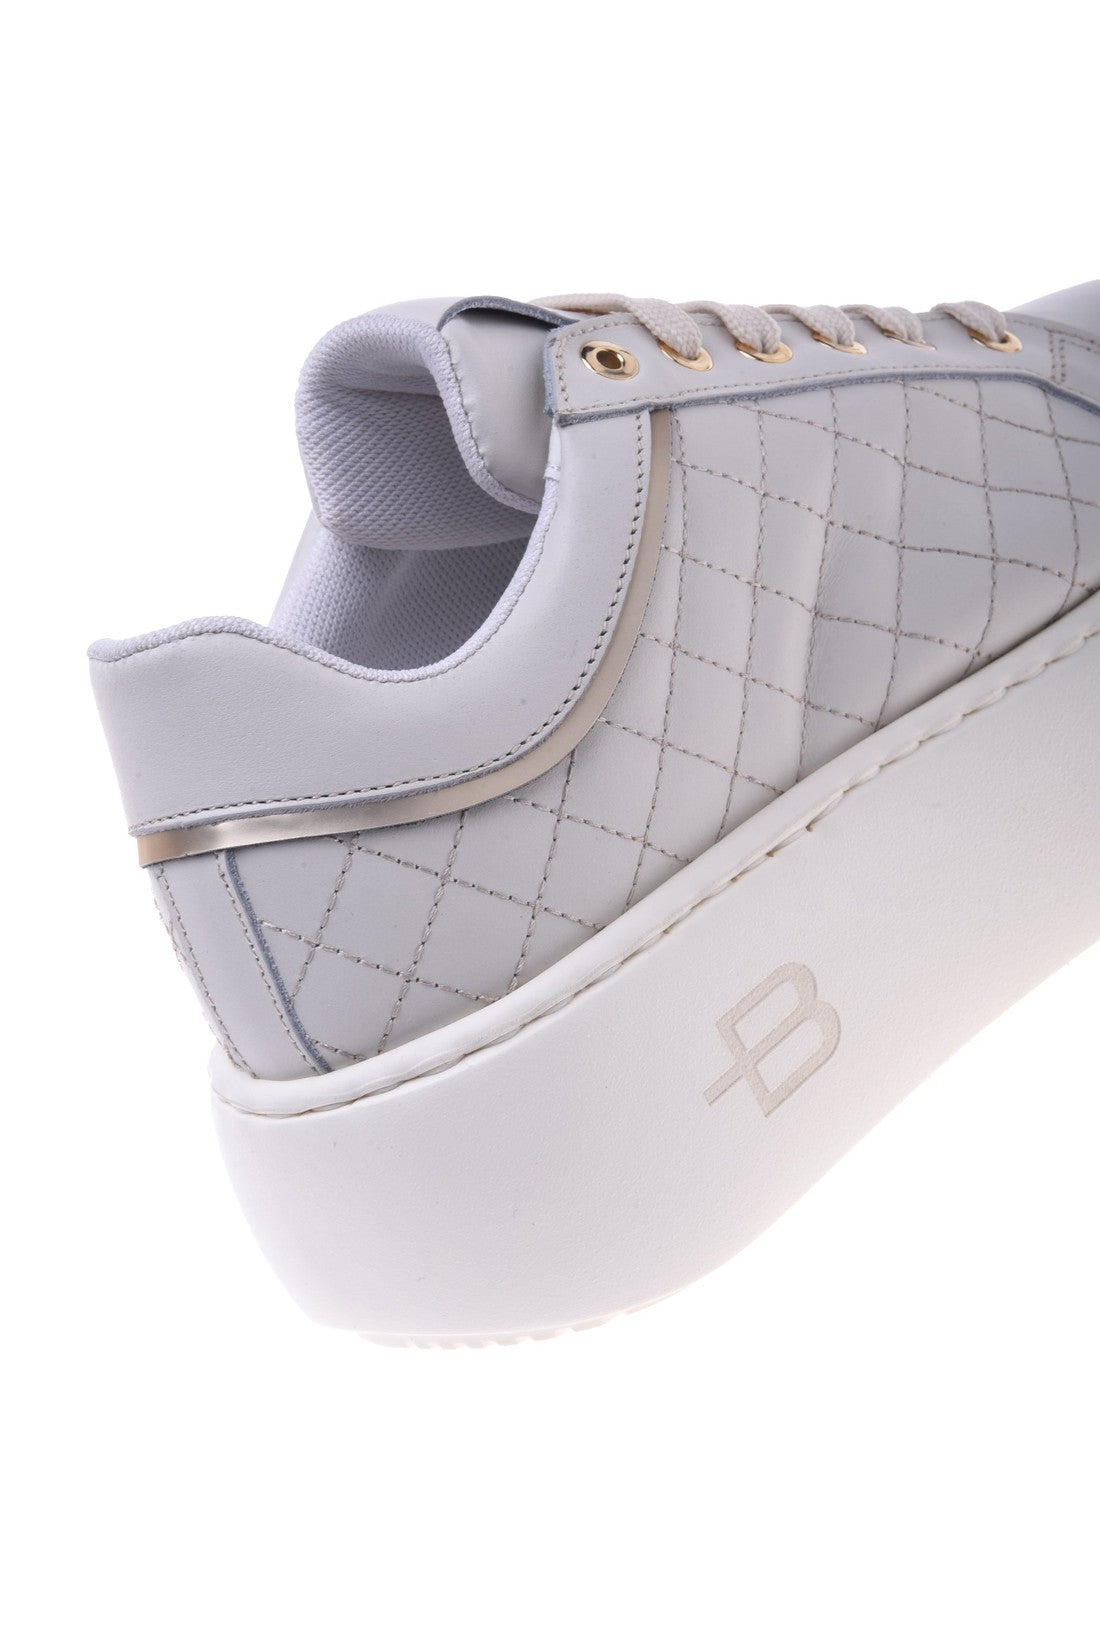 BALDININI-OUTLET-SALE-Sneaker-in-white-quilted-leather-Sneaker-ARCHIVE-COLLECTION-4.jpg